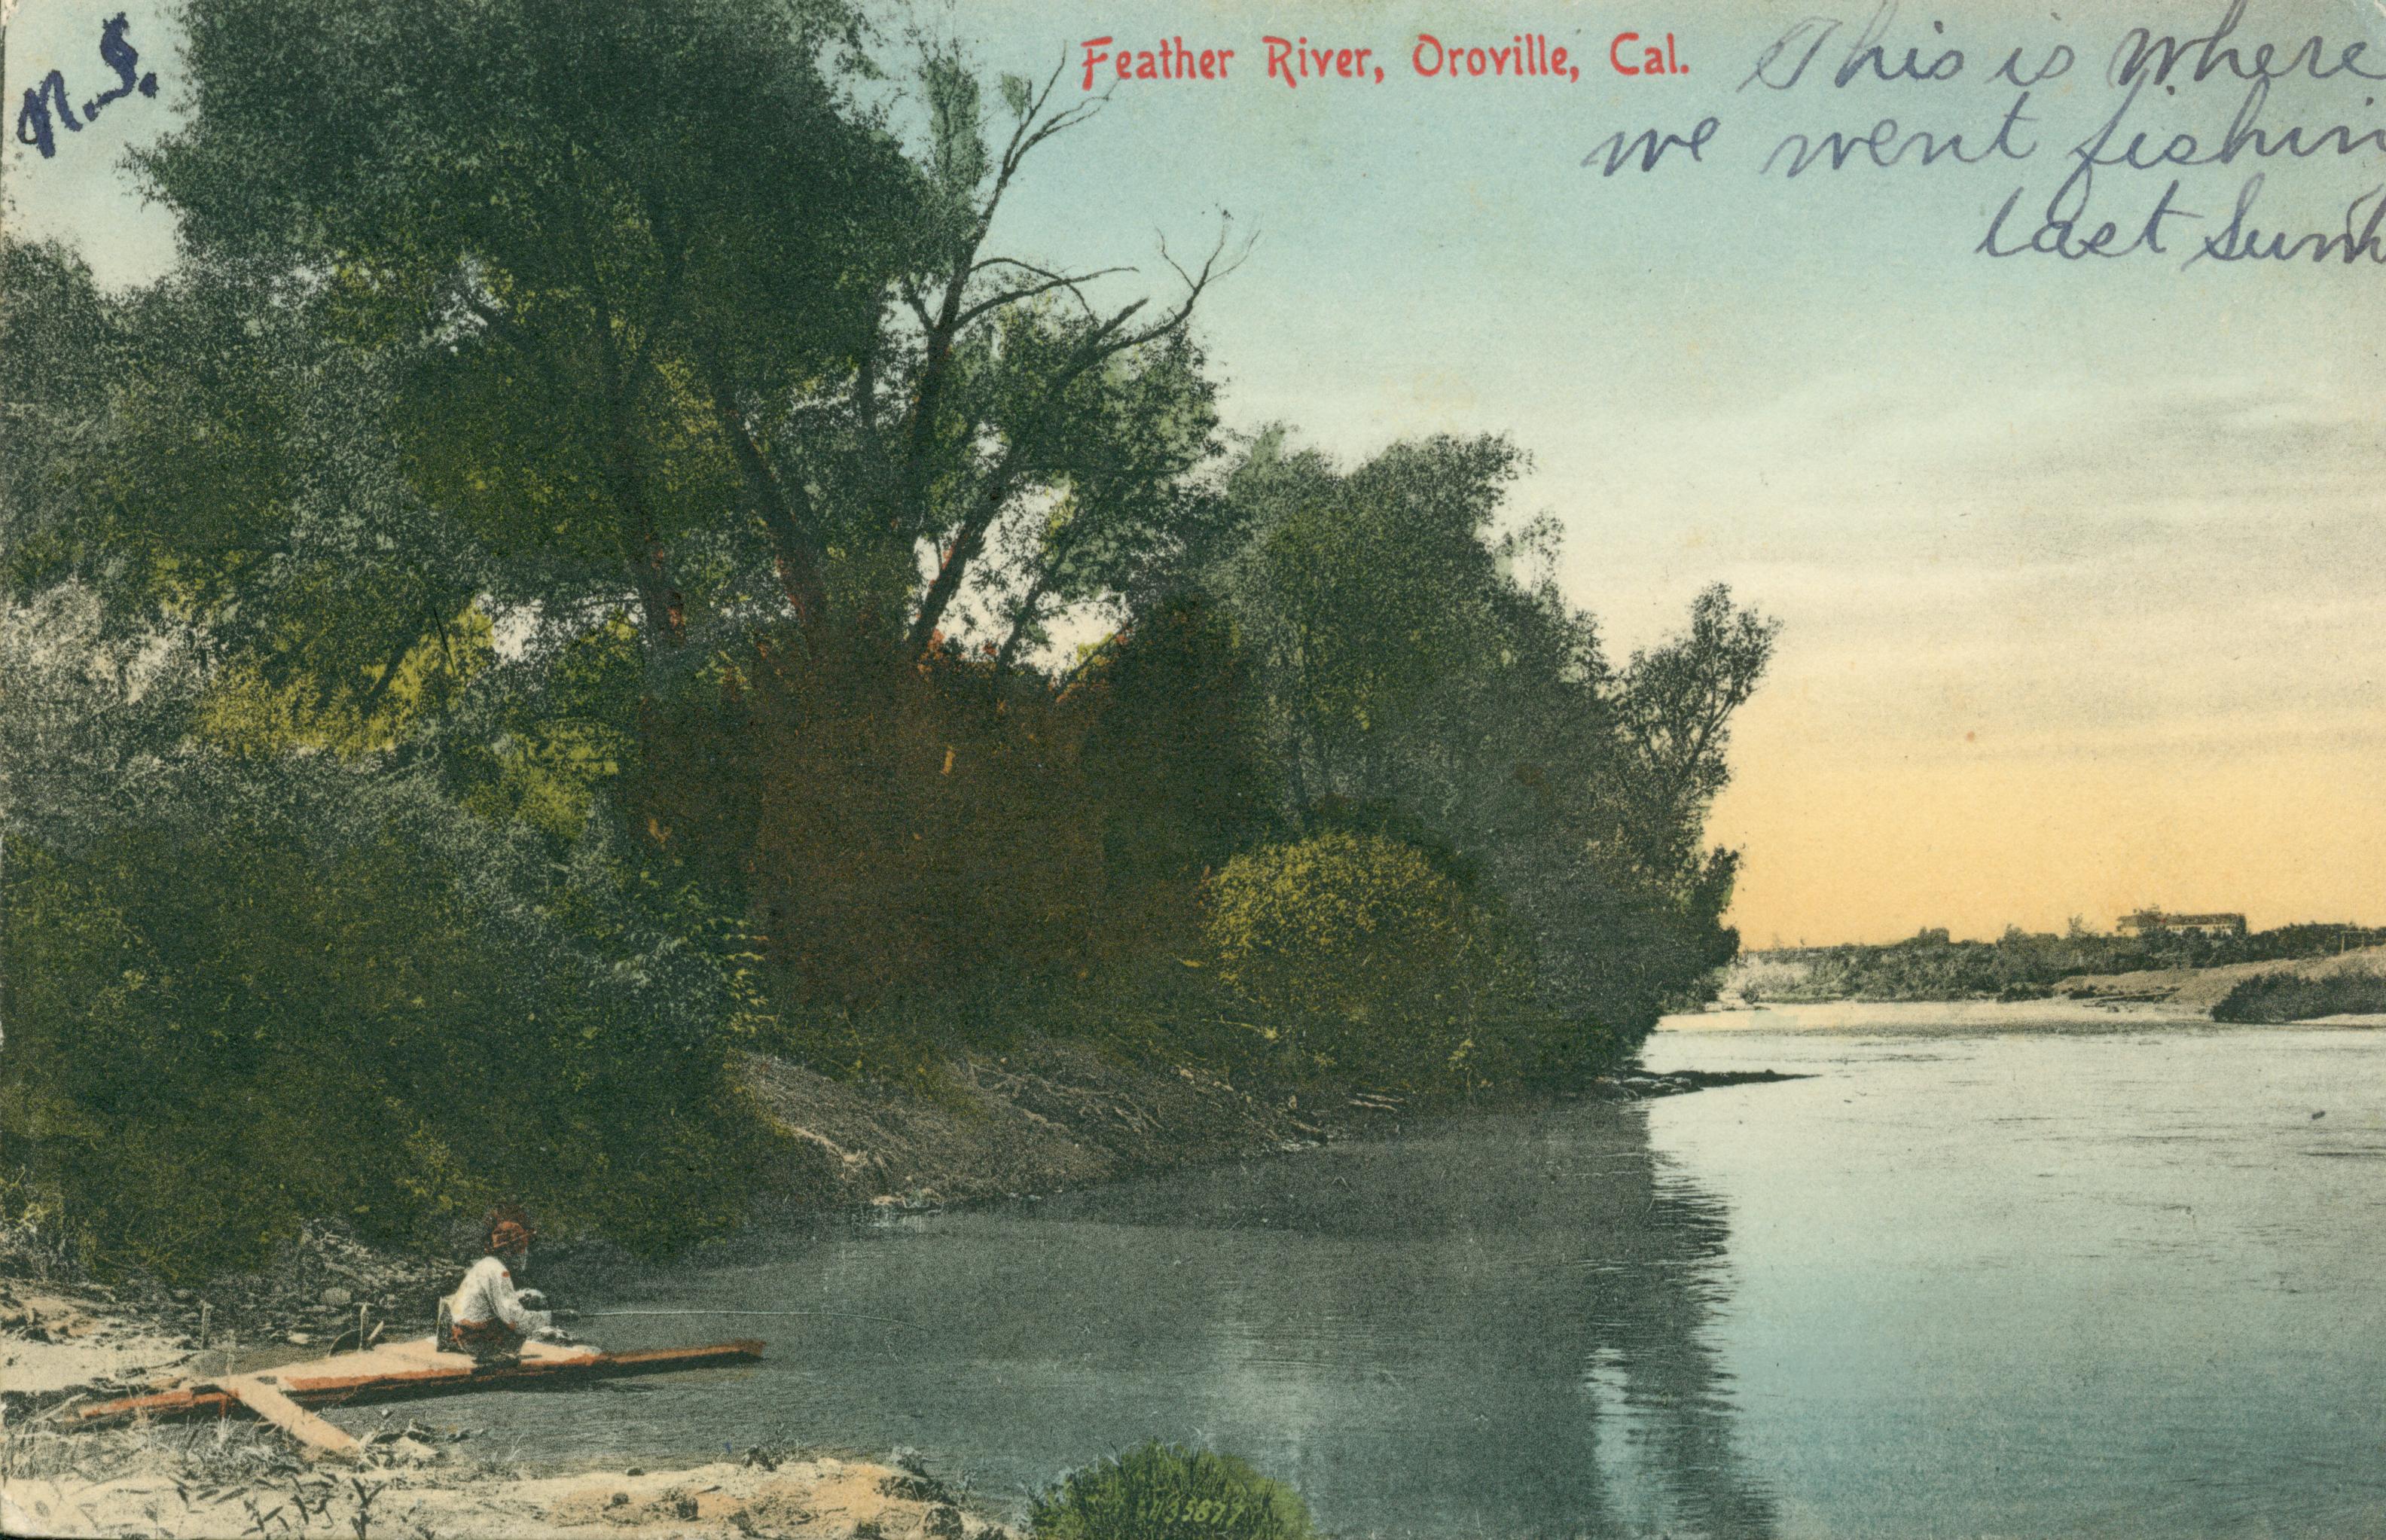 Shows a man fishing on a tree-lined river shore